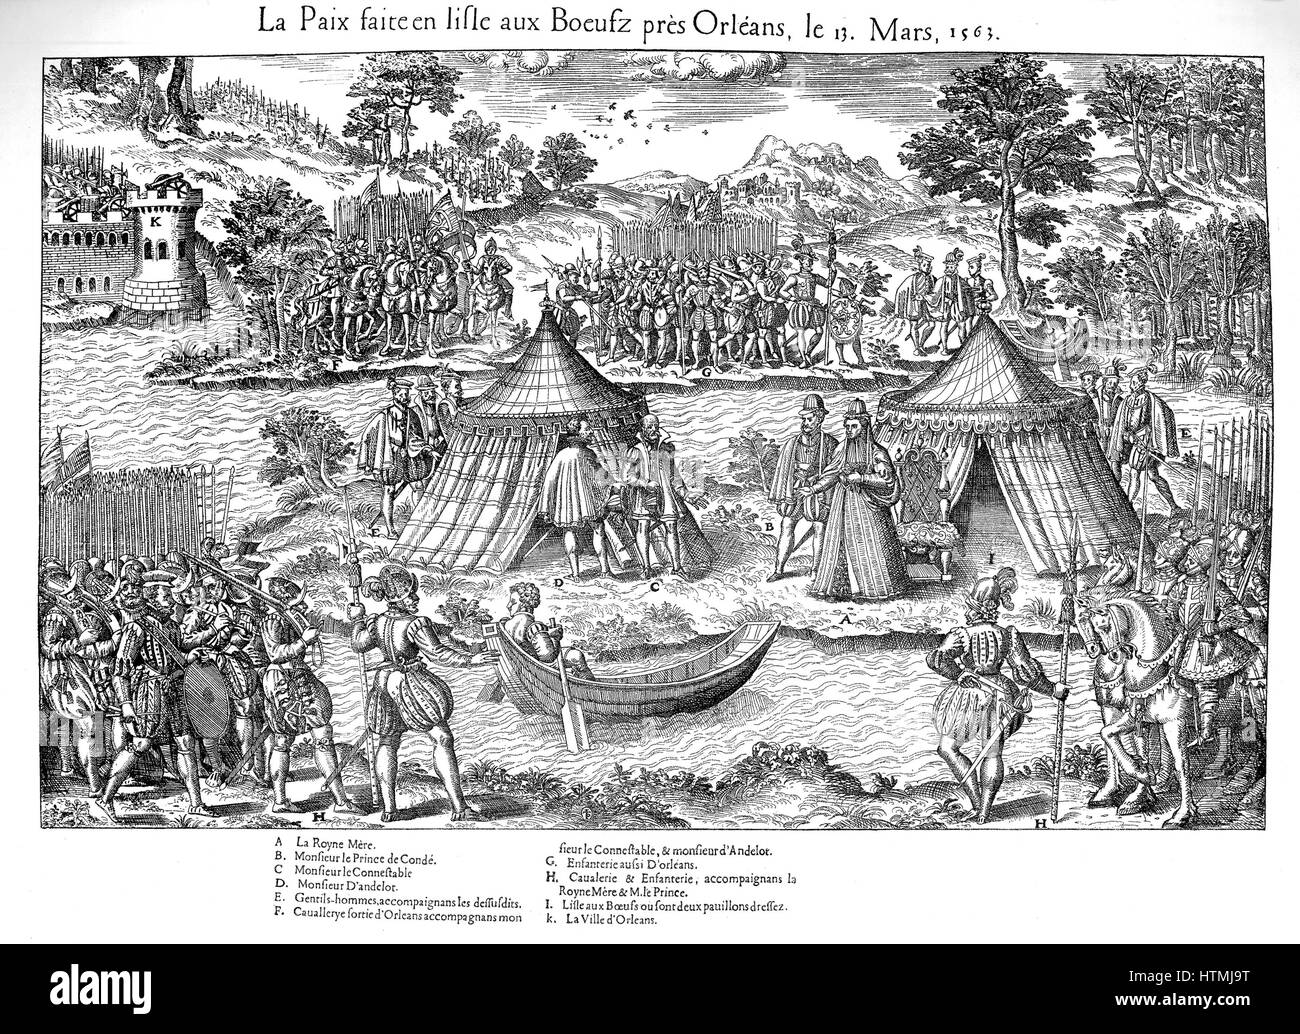 French Religious Wars 1562-1598. The Peace of Amboise, 12 March 1563, which ended the first religious war, held on the Isle de Boeuf, Orleans. Catherine de Medici (1519-1589), A. Louis, Prince de Conde (1530-1569) leader of the Huguenots, B. Constable Ann Stock Photo